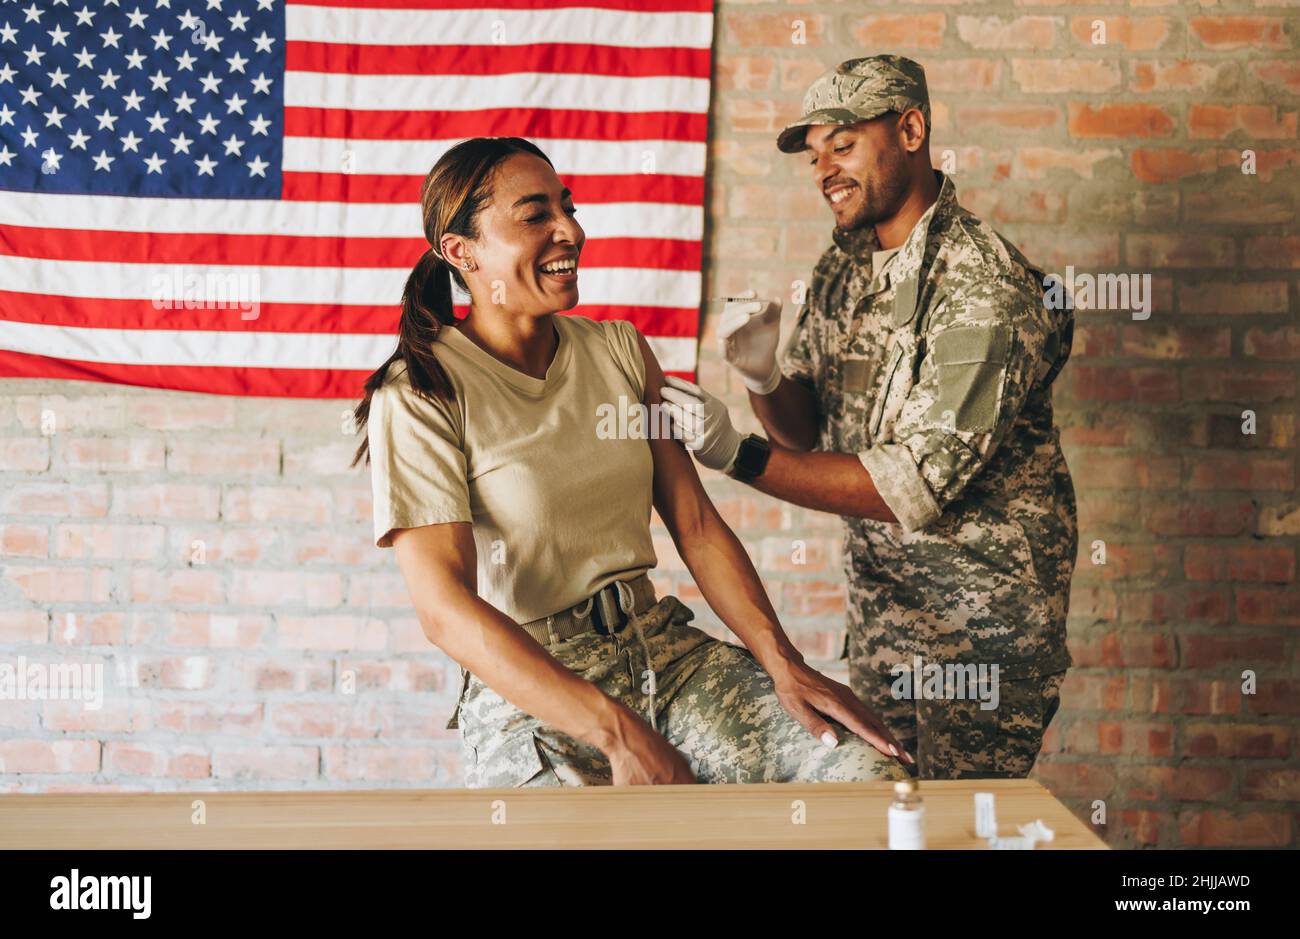 Cheerful servicewoman receiving a dose of the covid-19 vaccine in the military hospital. American female soldier laughing happily while getting inject Stock Photo